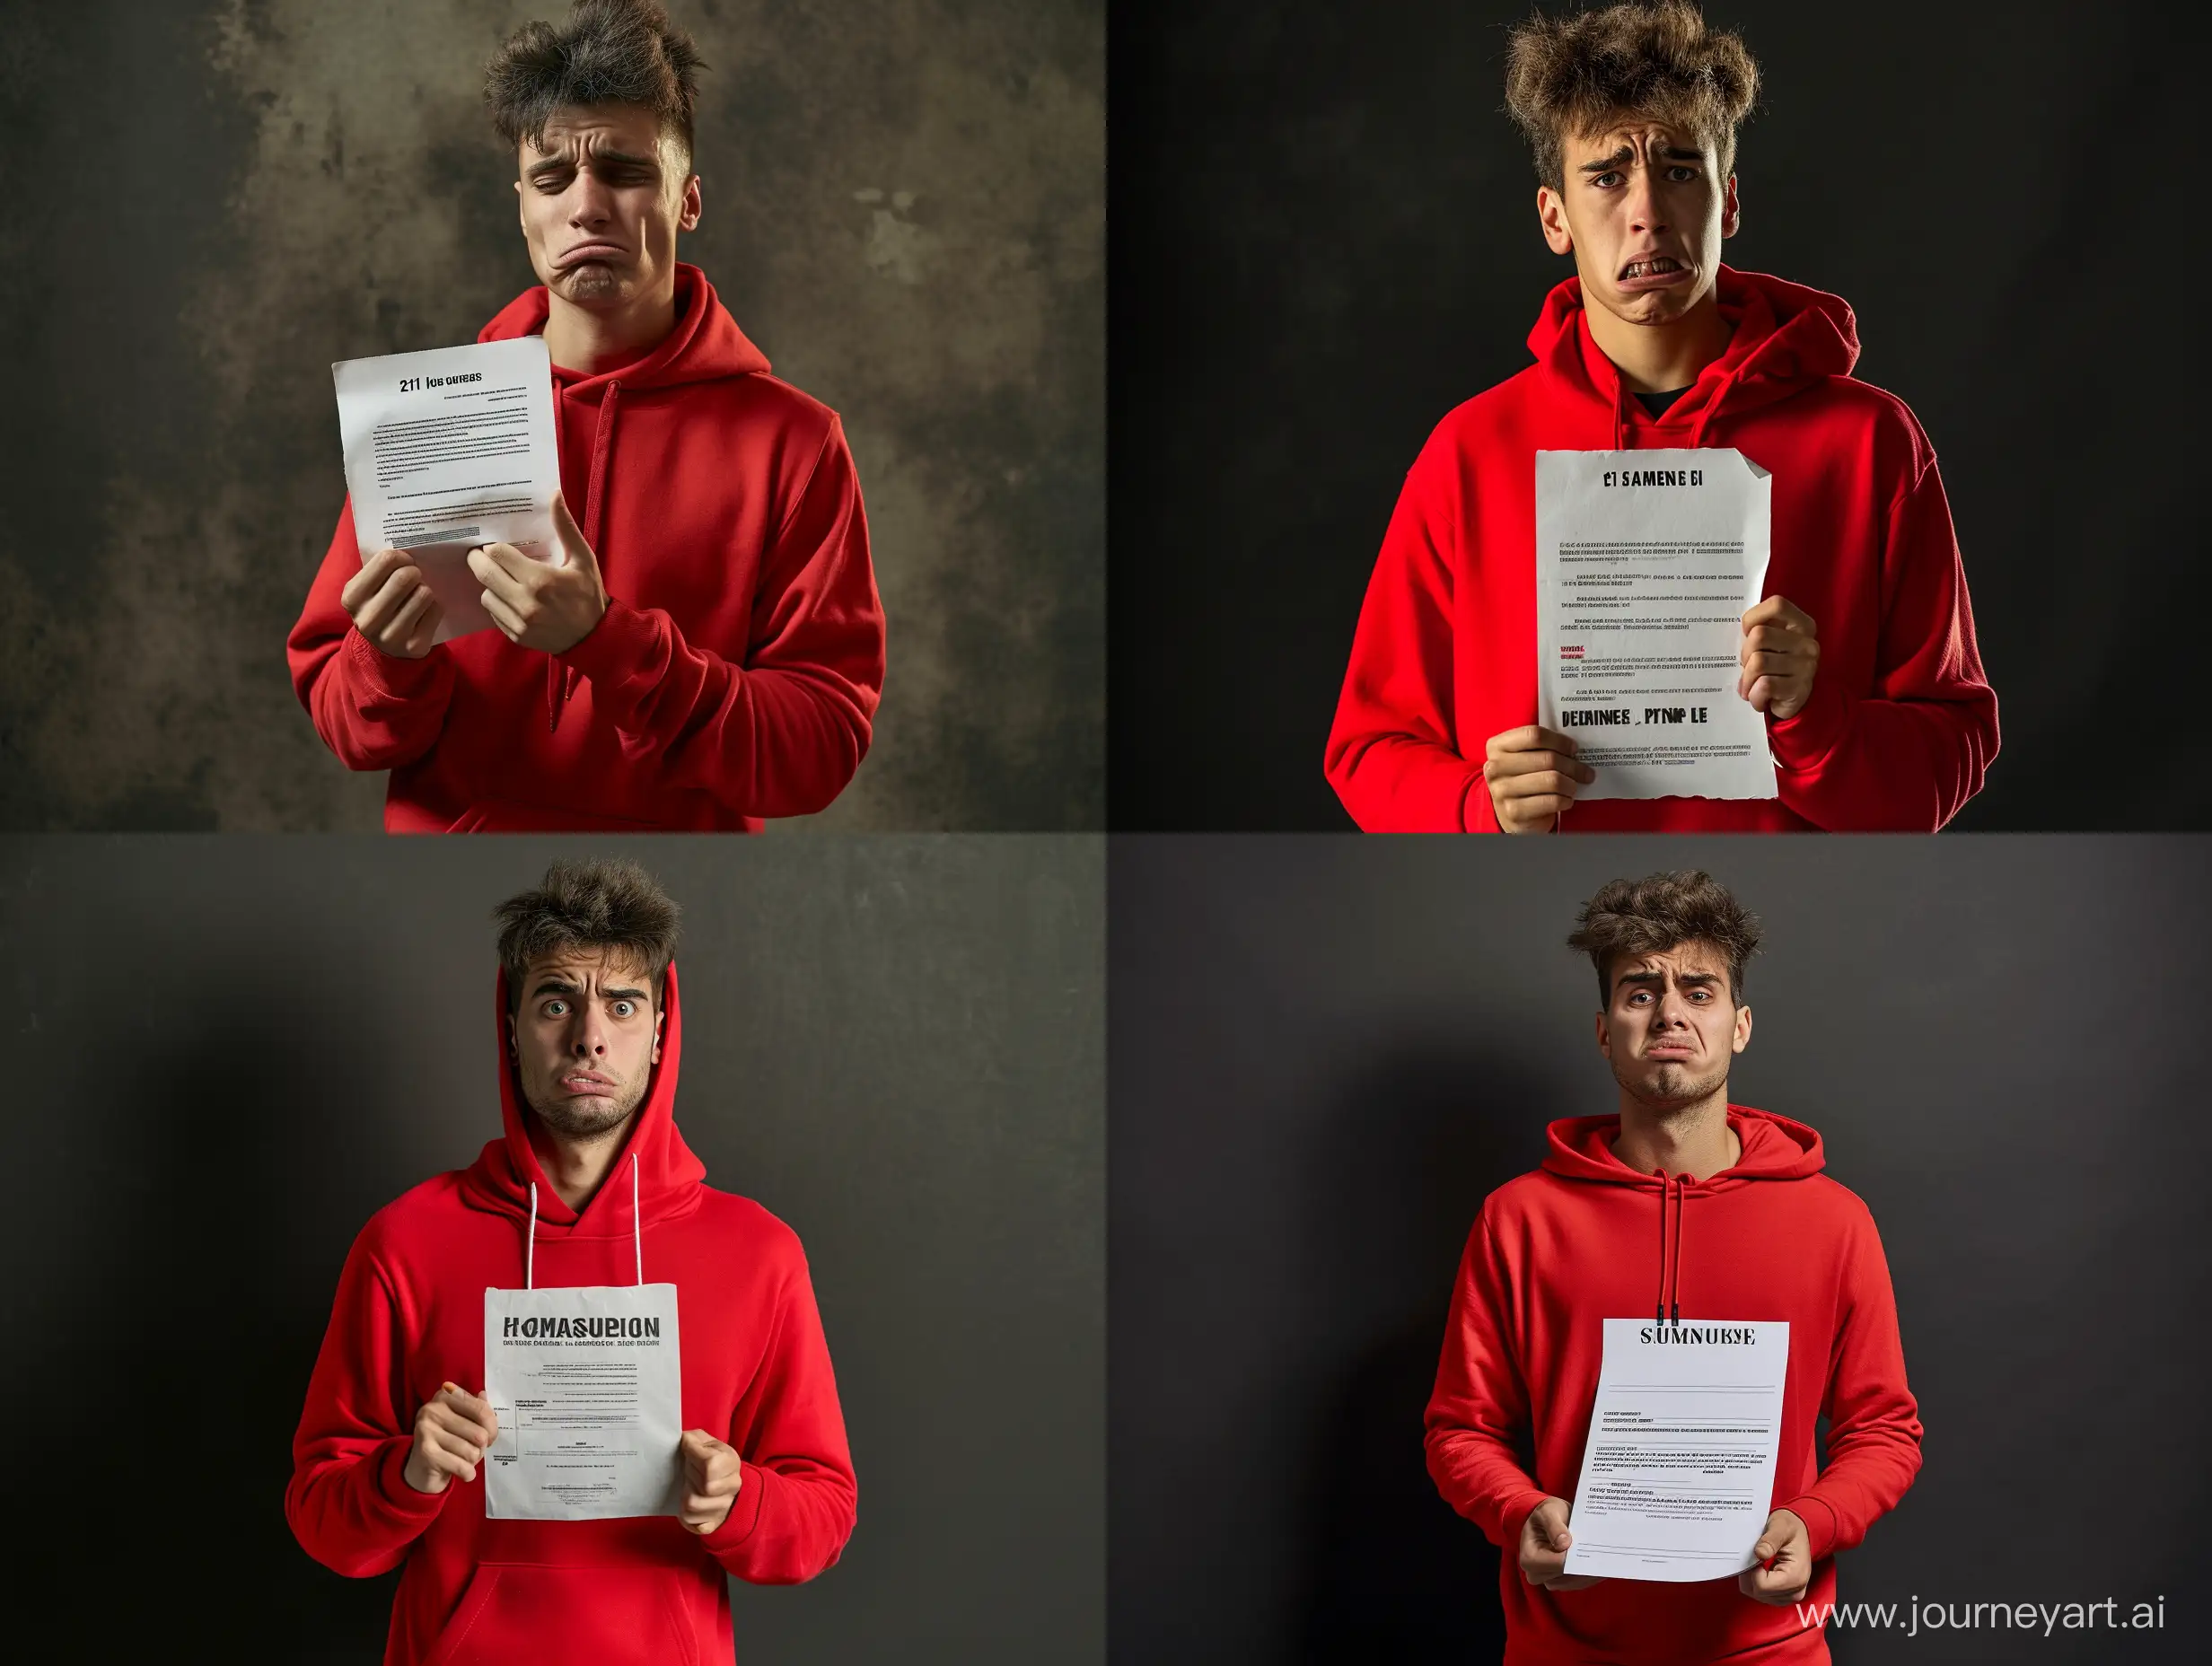 Upset-21YearOld-Receives-Military-Service-Summons-in-Red-Hoodie